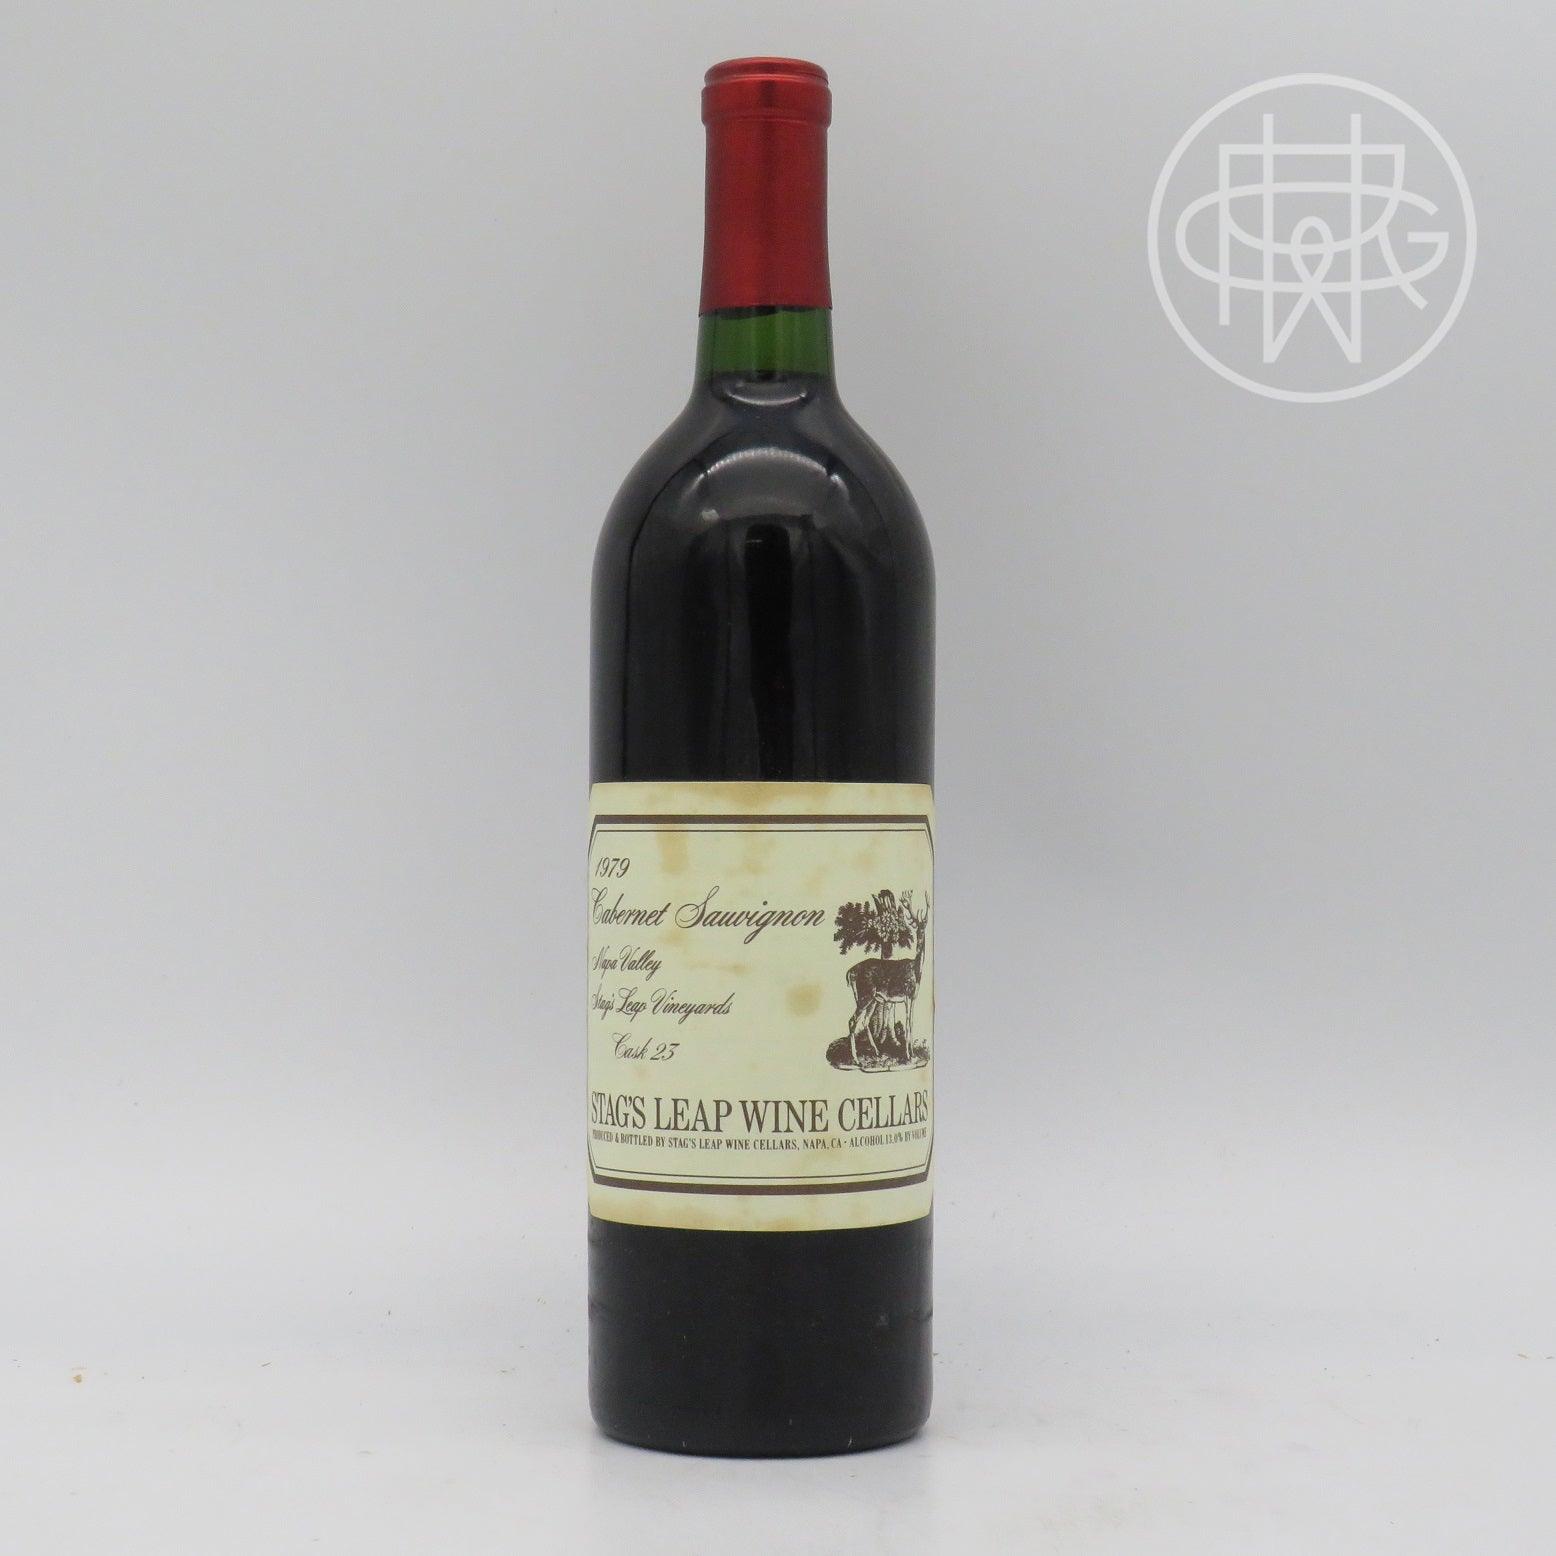 Stag's Leap Wine Cellars Cask 23 1979 750mL (Top Shoulder, Slightly Soiled Label) - GRW Wine Collection